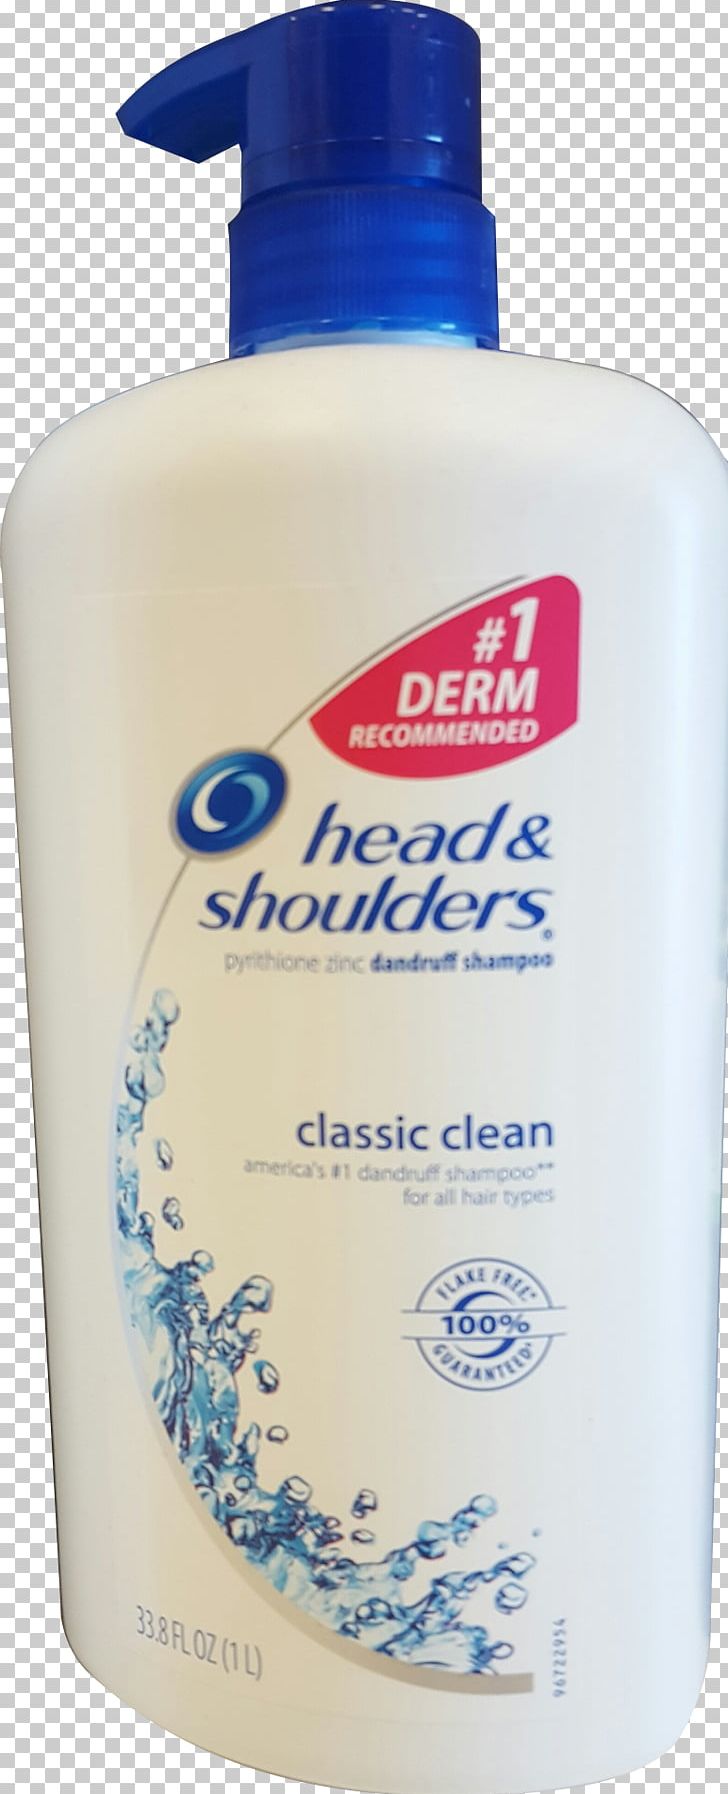 Lotion Head & Shoulders Shampoo Shower Gel Hair PNG, Clipart, Capelli, Costco, Dandruff, Hair, Hair Conditioner Free PNG Download